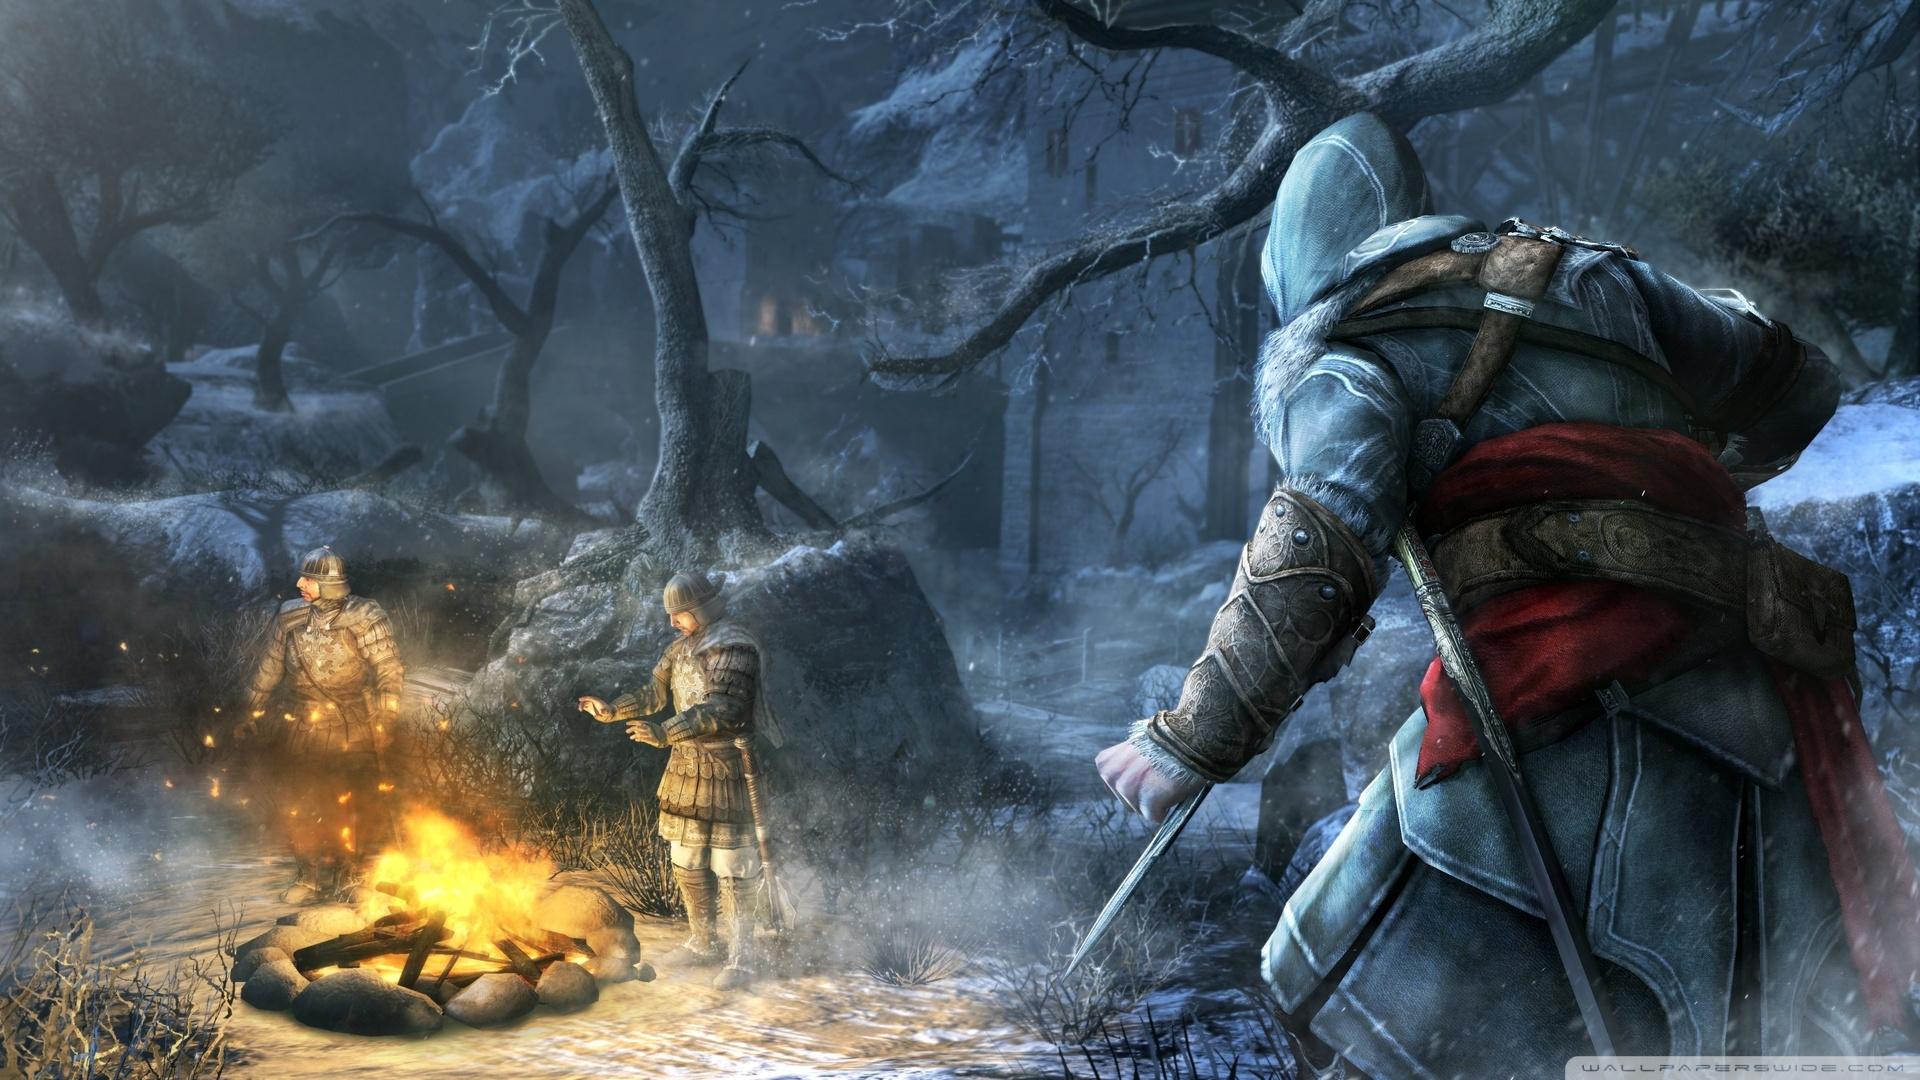 1920 x 1080 · jpeg - Assassins Creed: Revelations HD Wallpapers | I Have A PC